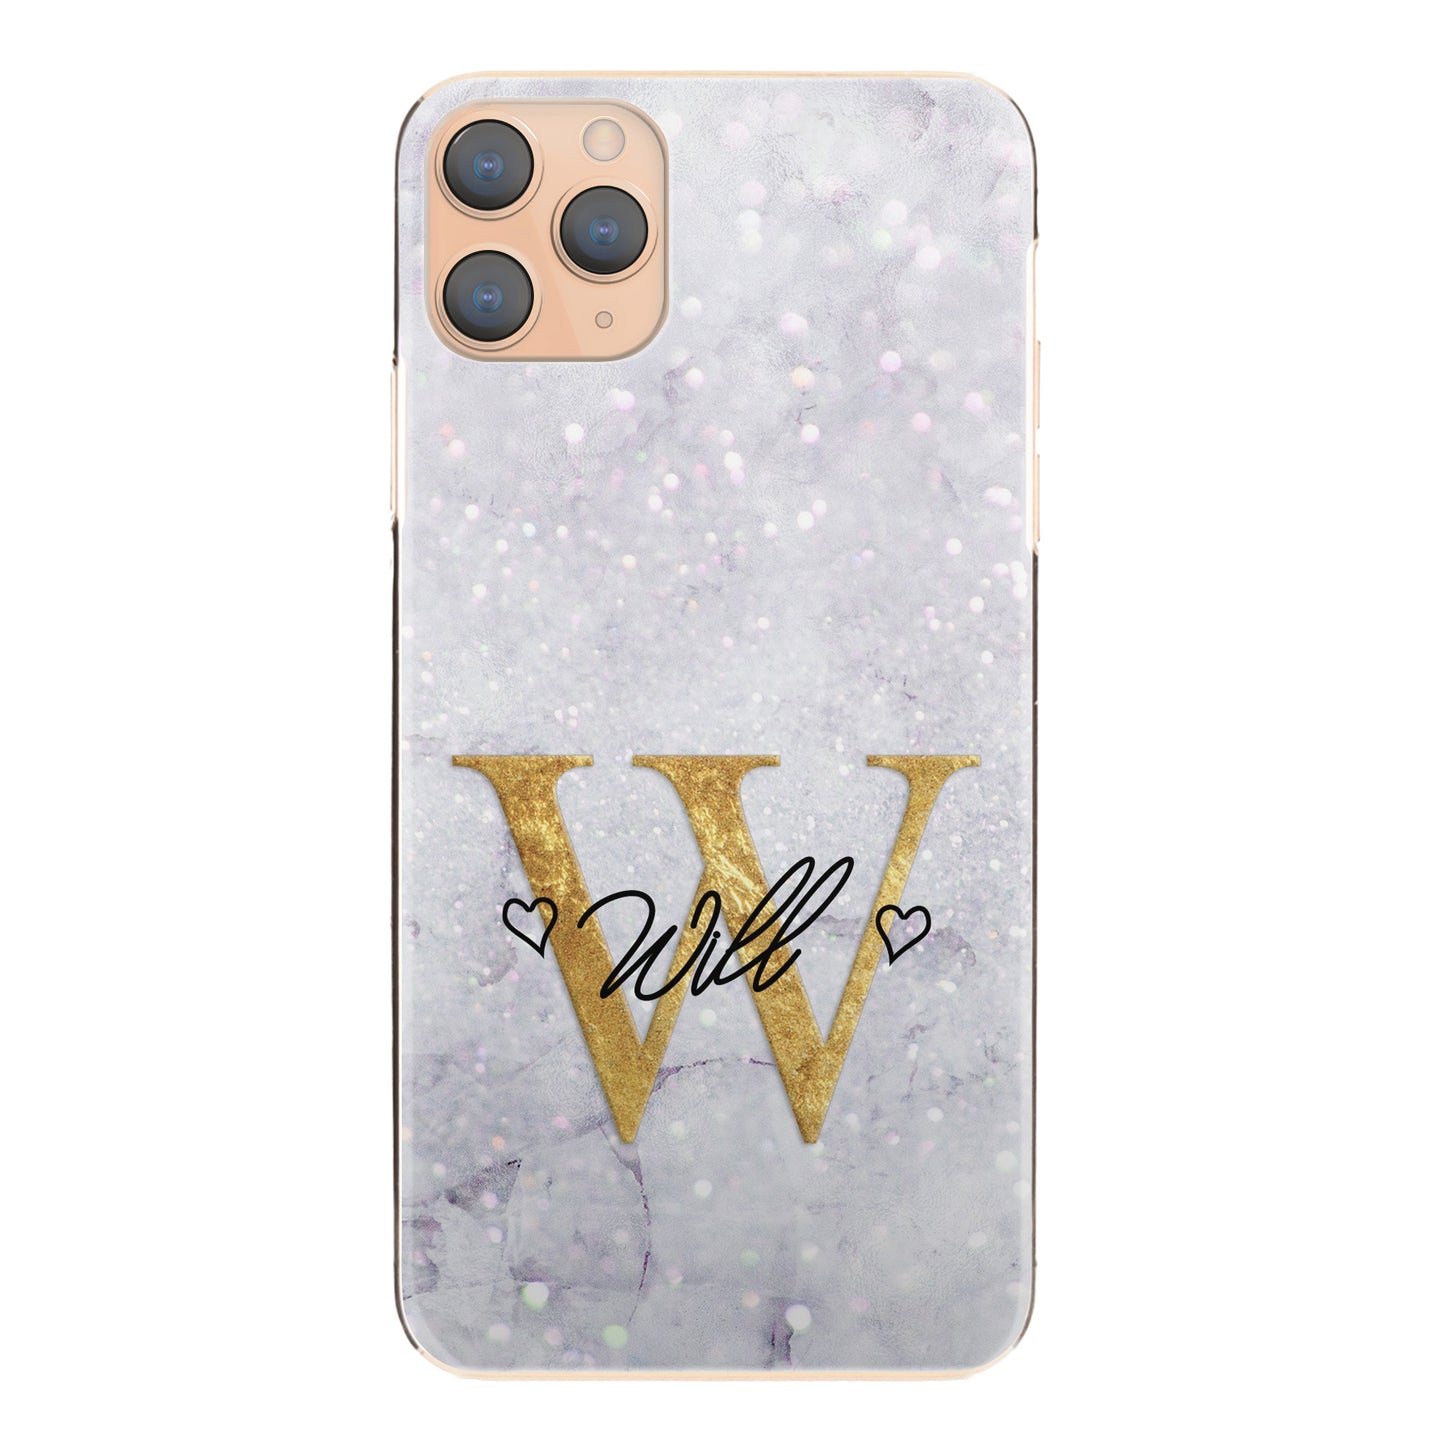 Personalised Xiaomi Phone Hard Case with Gold Initial and Heart Accented Text on Crystal Marble